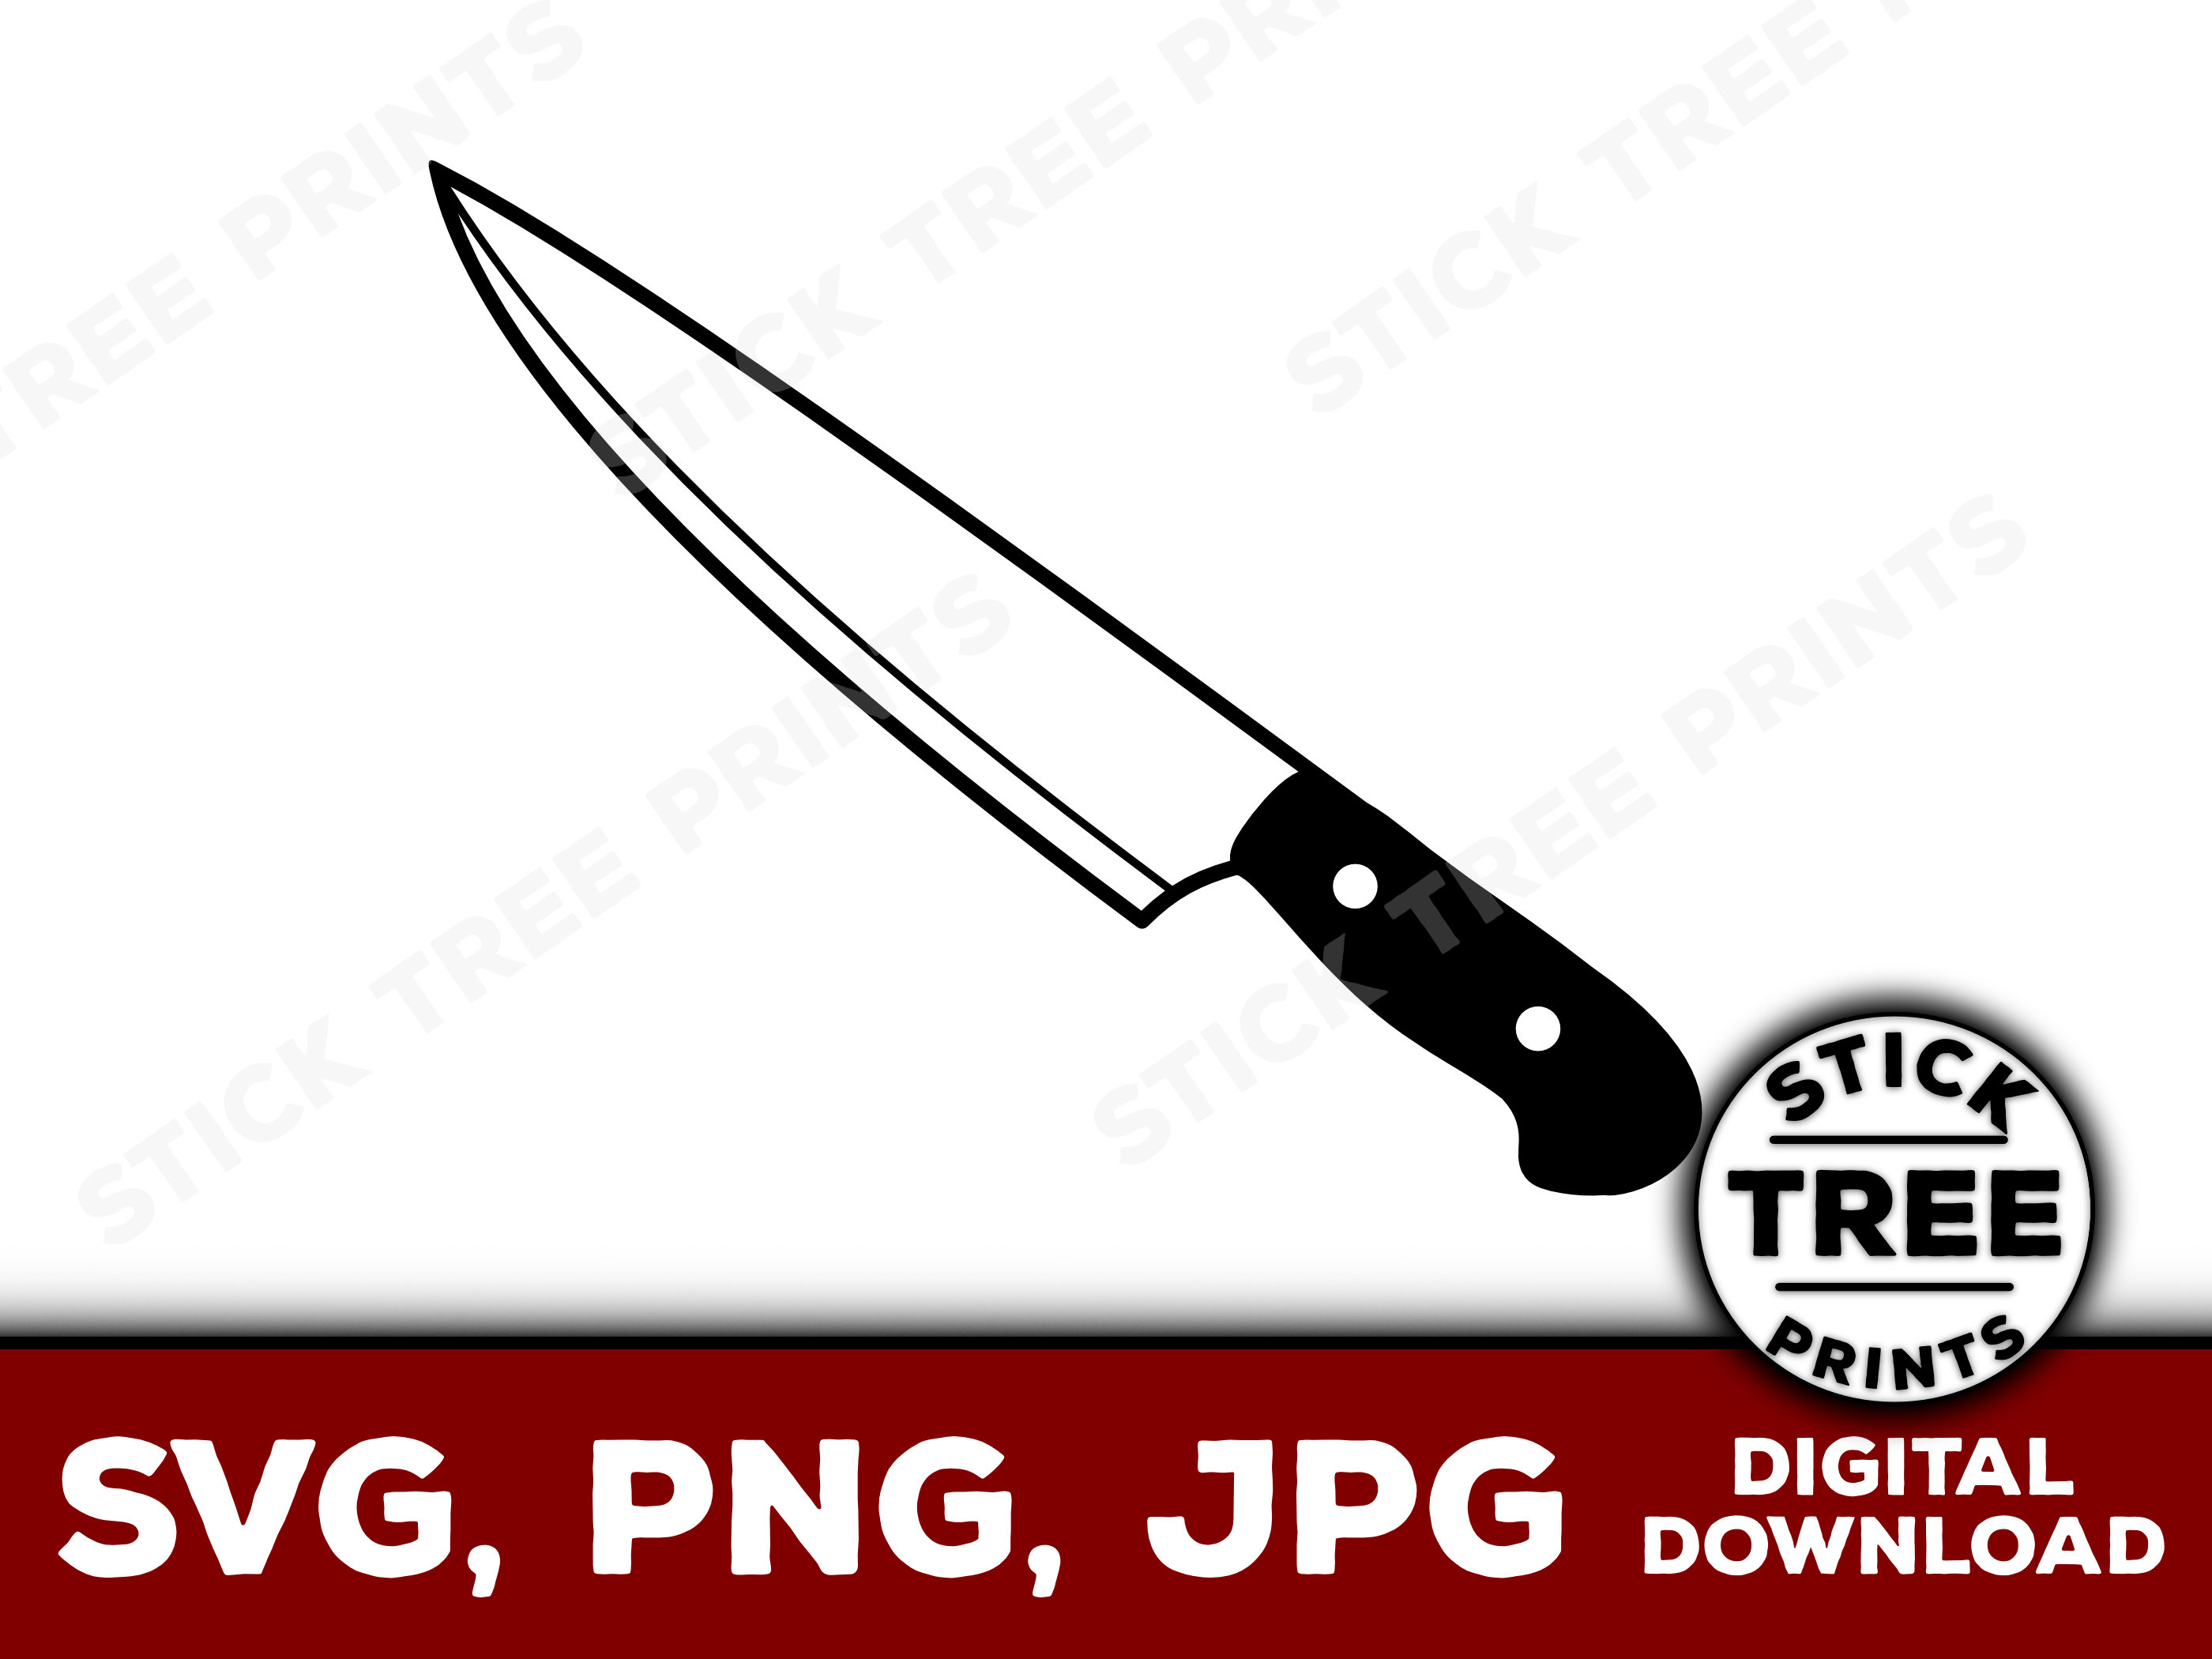 Knife SVG , Knife Clipart, Knife Files for Cricut, Knife Cut Files for  Silhouette, Knife Vector, Dxf, Png, Eps 